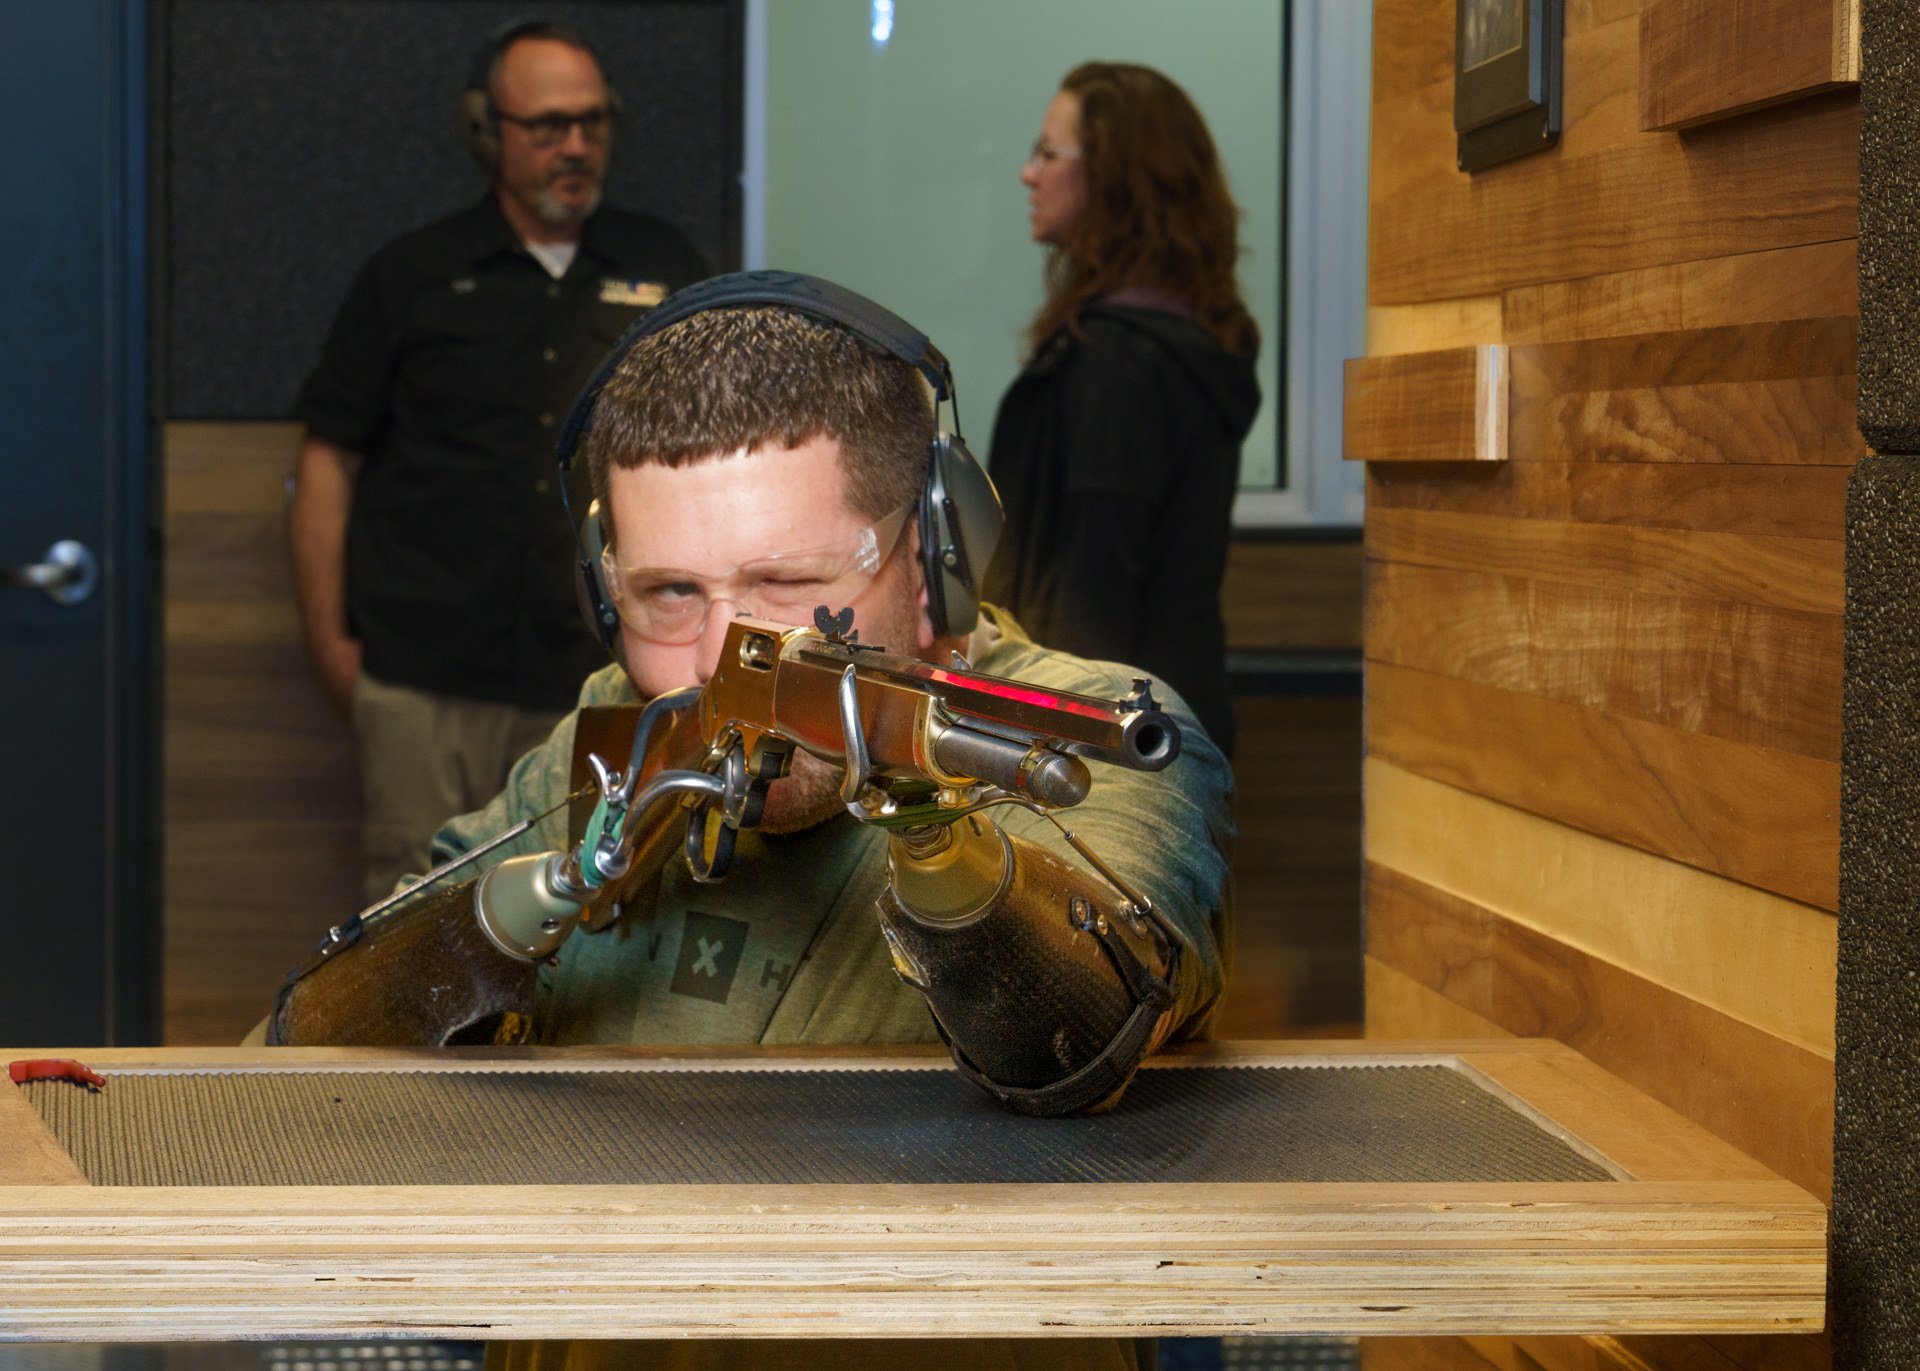 bilateral transradial patient, Jason Koger uses his body-powered hook prostheses to fire a gun at a gun range.